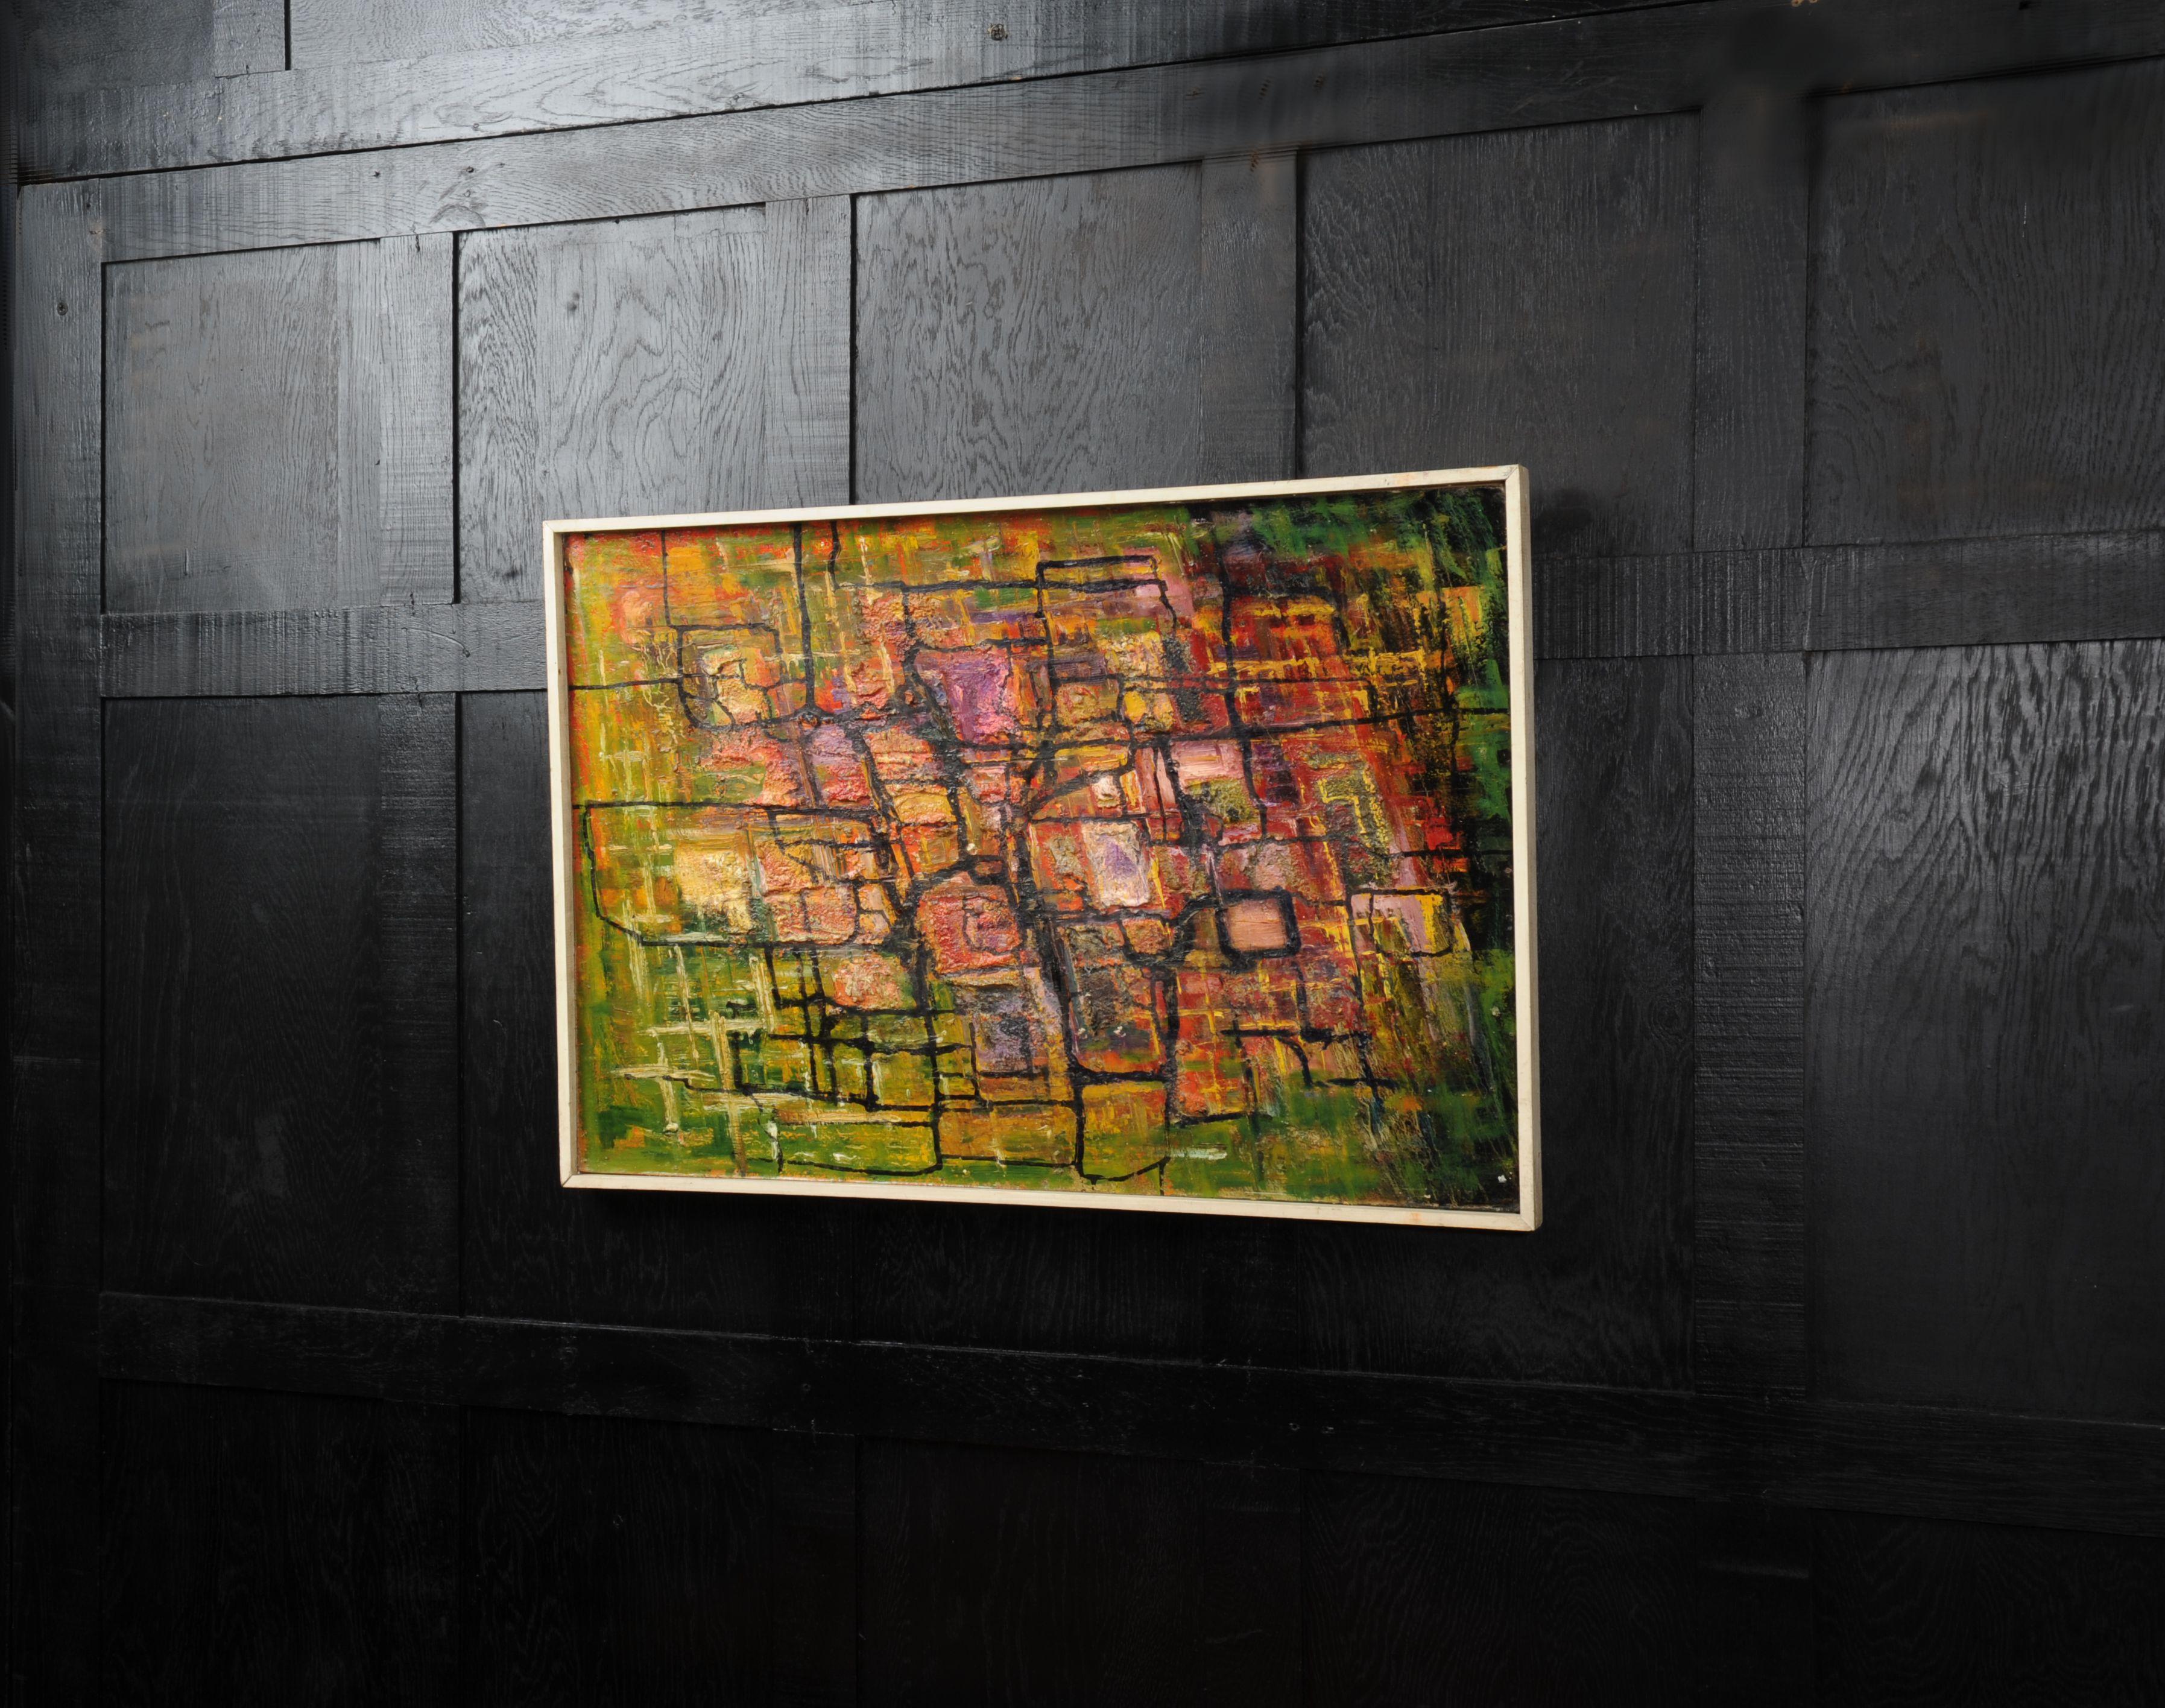 A stunning midcentury abstract oil on board by the listed artist William Ernst Burwell (1911-1974). Beautifully painted with heavily applied textures of predominantly greens and reds. It is in its original gallery frame of painted softwood. We have